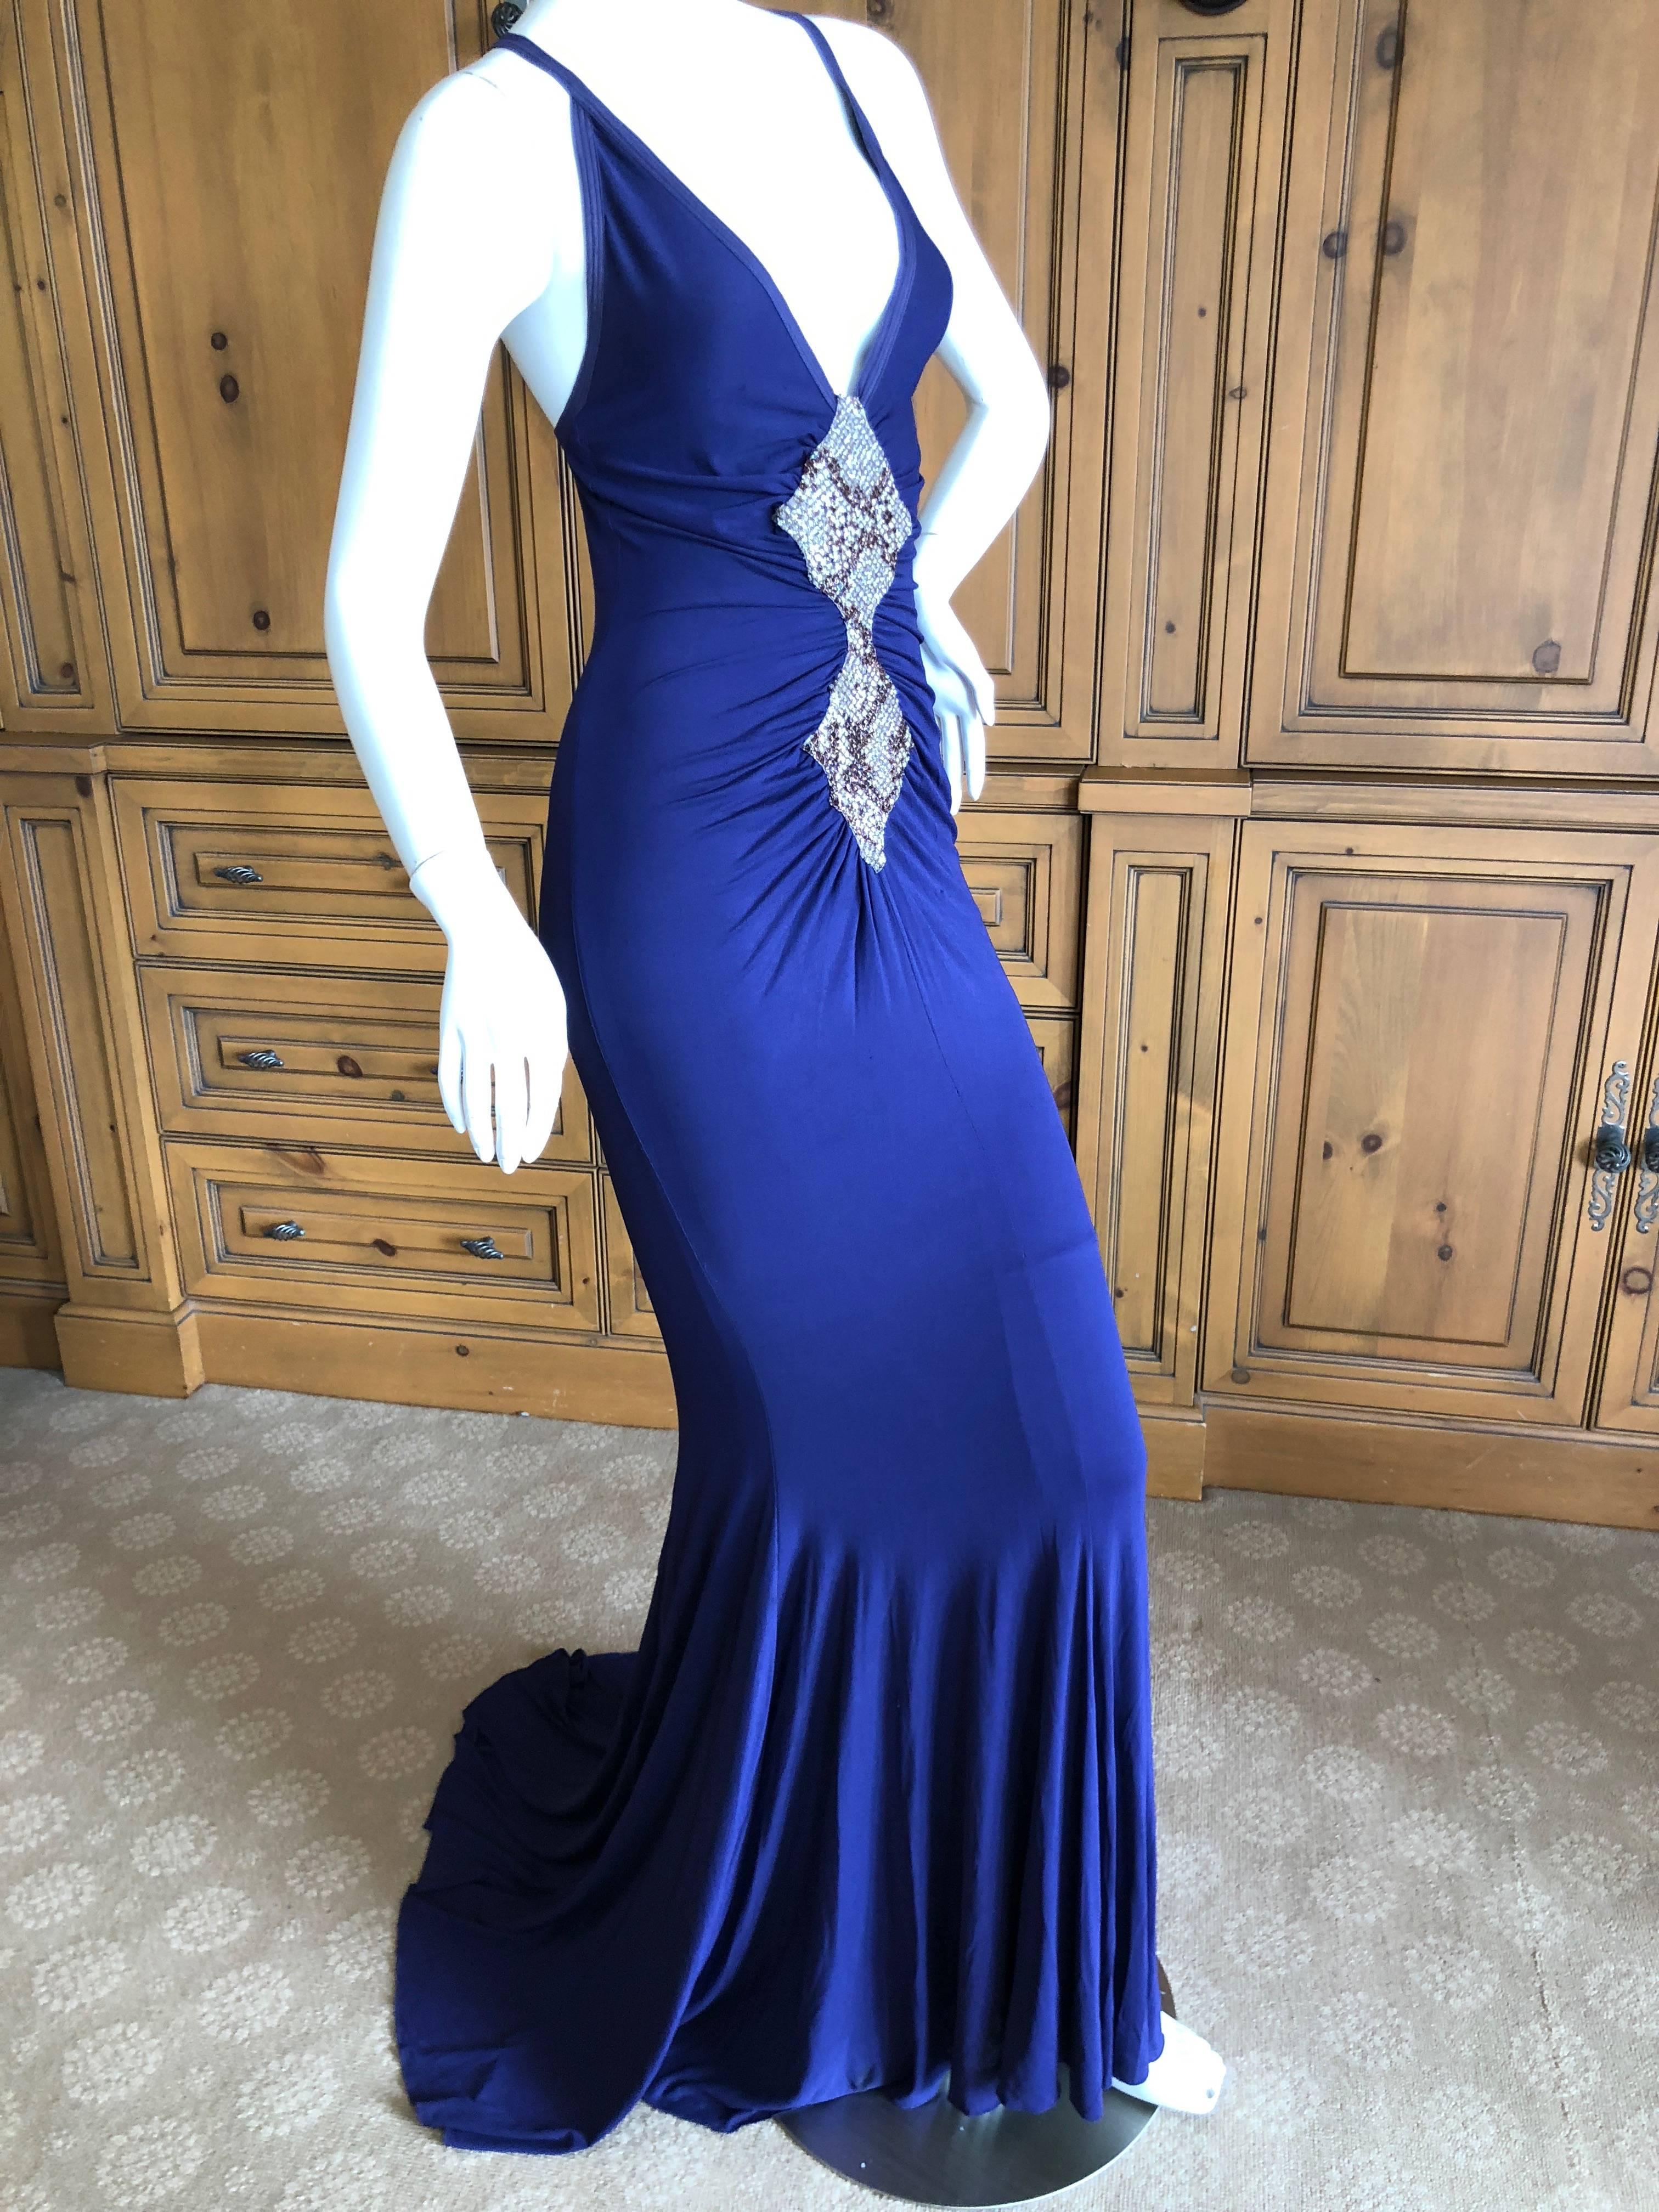 Roberto Cavalli Vintage Evening Dress .
So beautiful, with bead embellished bust in a python pattern.
There is no size tag, I estimate it to be European size 38

Bust  36